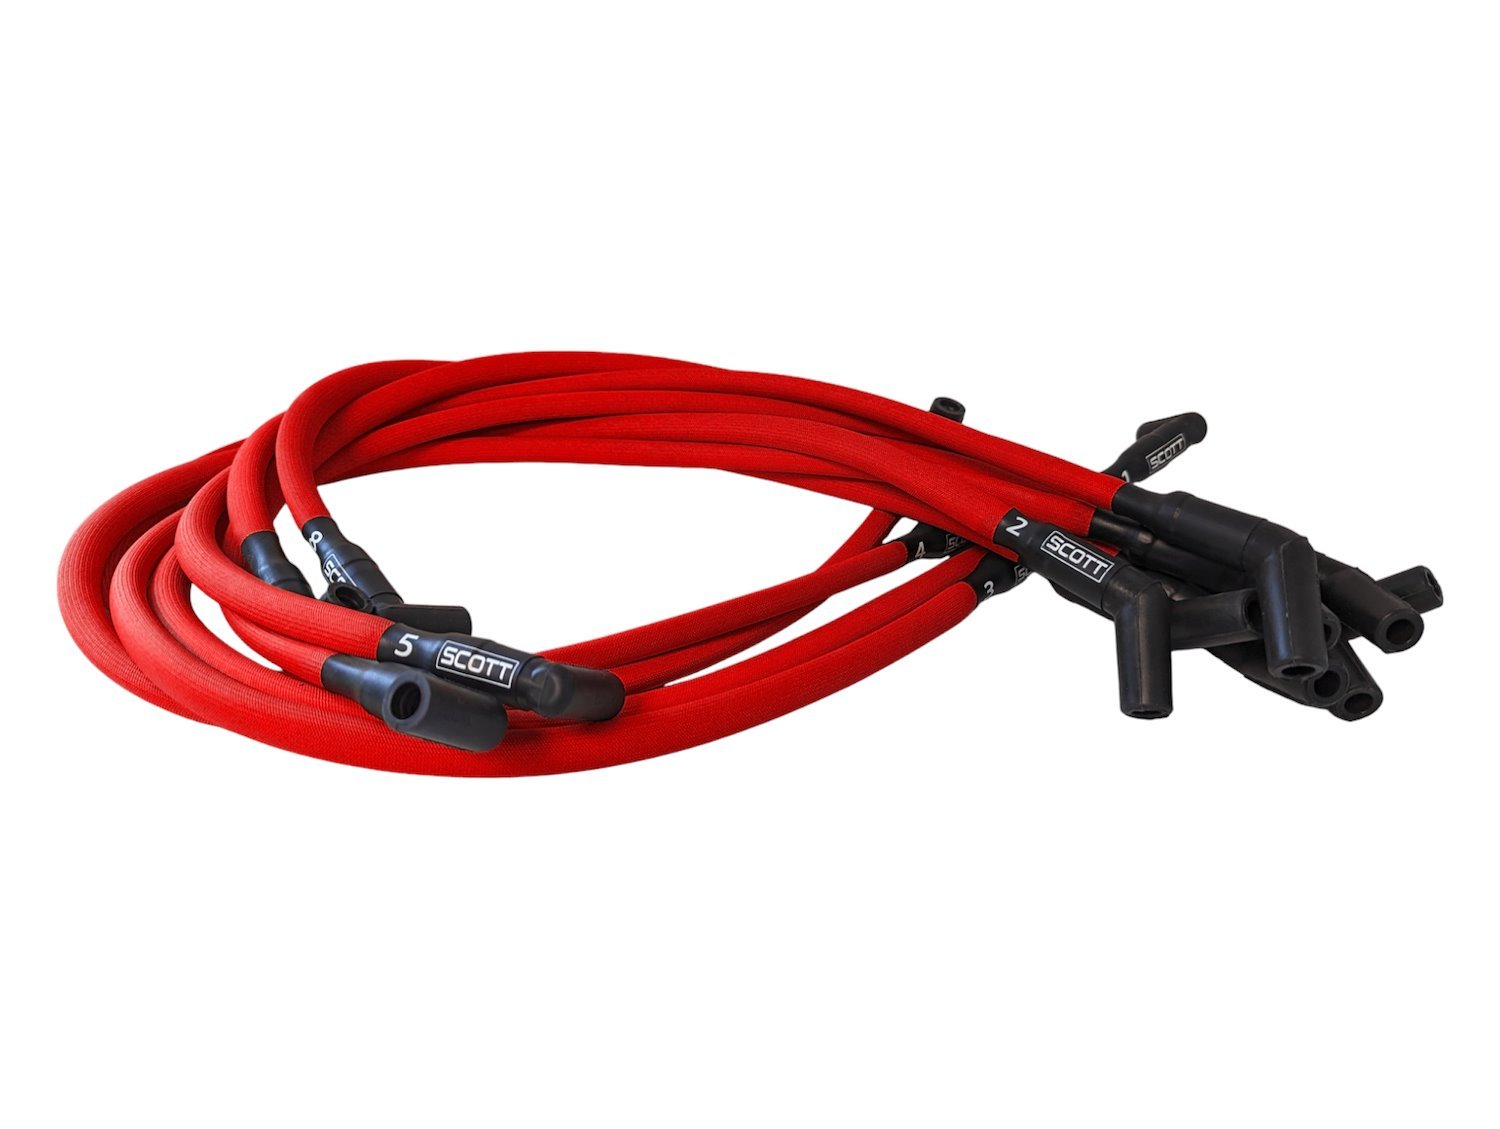 SPW-PS-439-2 High-Performance Fiberglass-Oversleeved Spark Plug Wire Set for Small Block Ford, Under Header [Red]